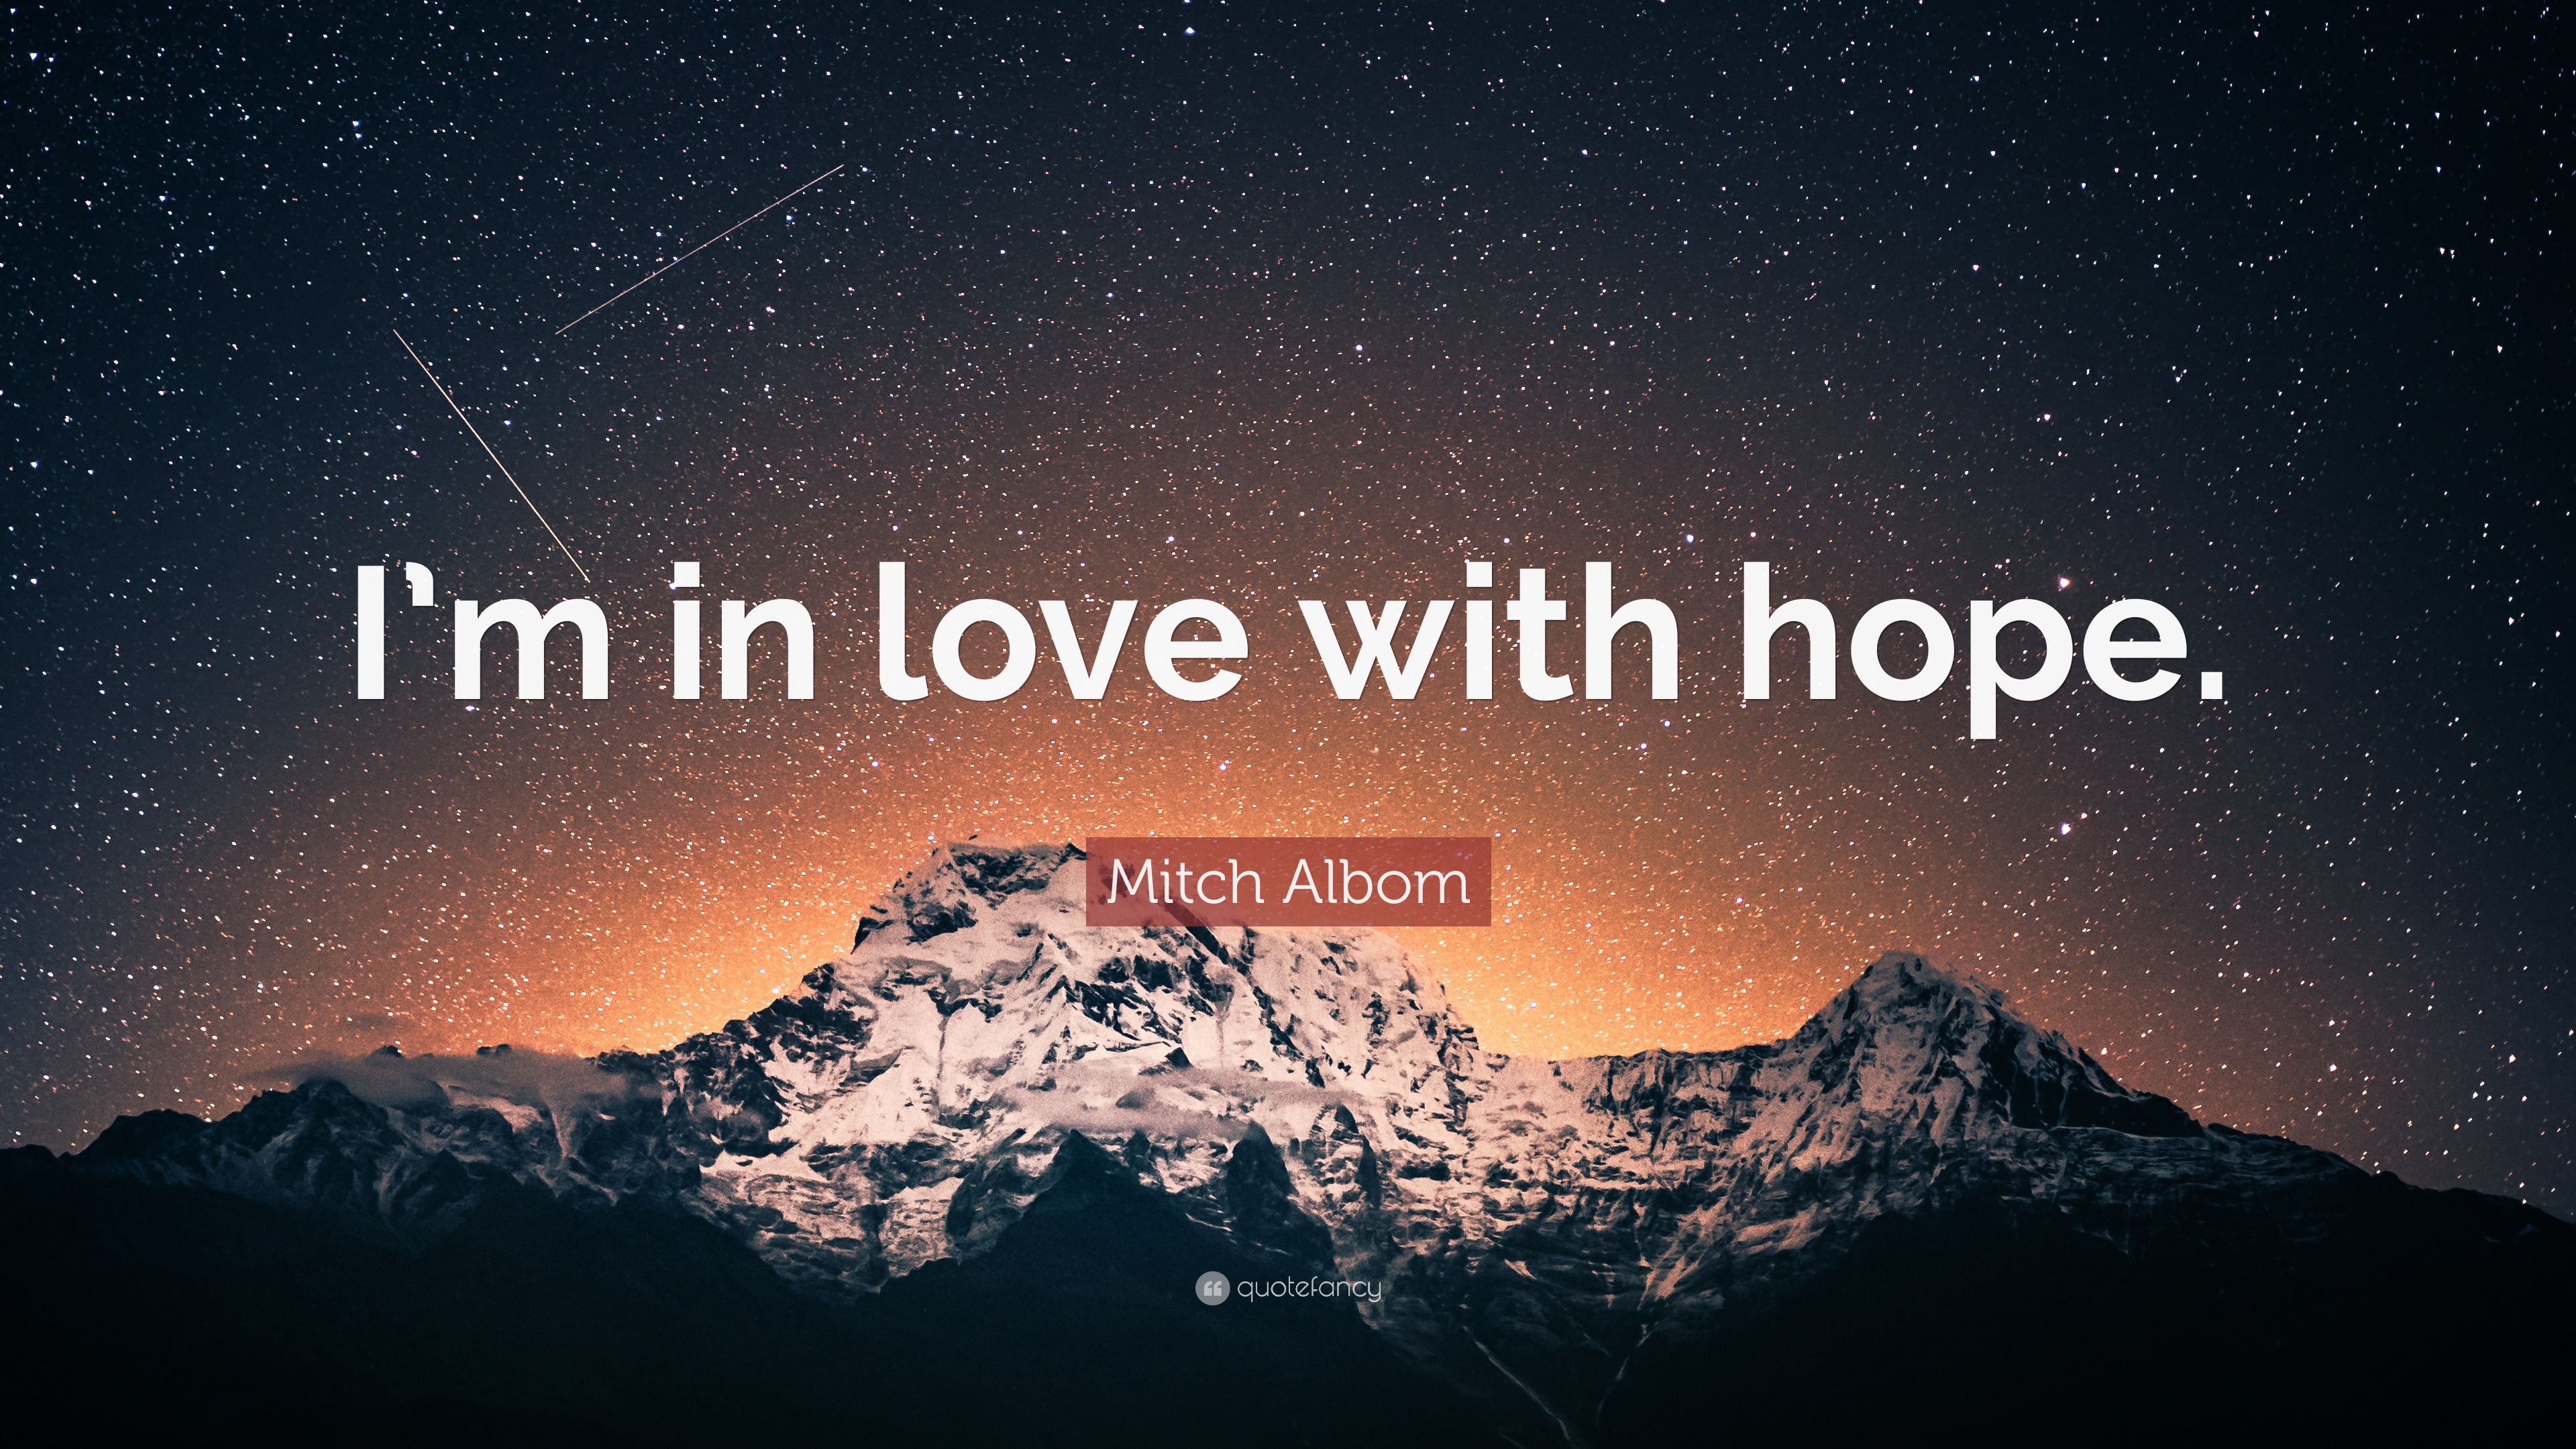 Mitch Albom Quote: “I'm in love with hope.”